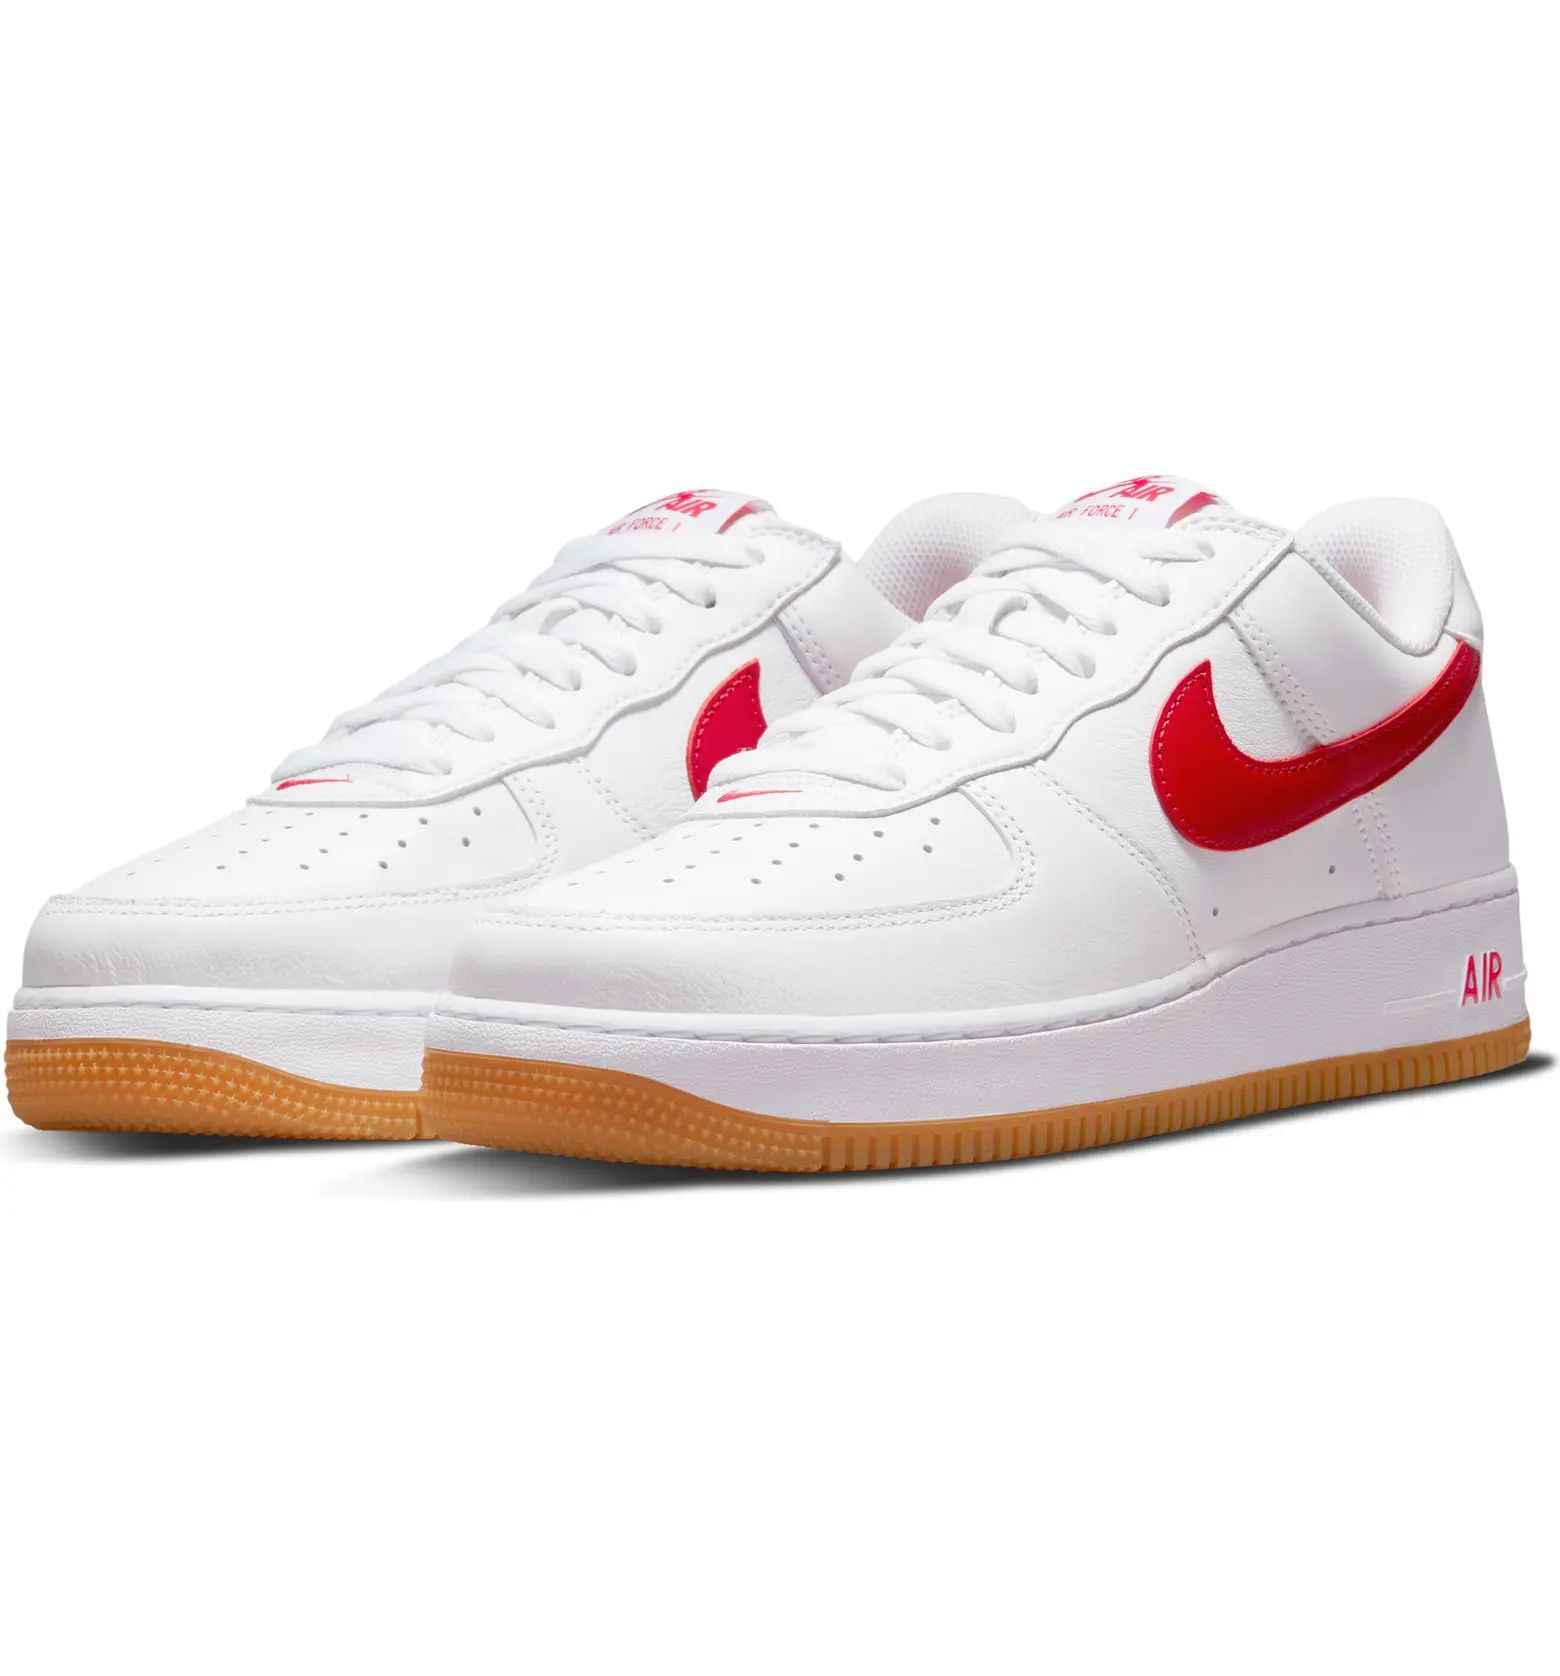 Air Force 1 Low Retro QS Sneaker | Nordstrom